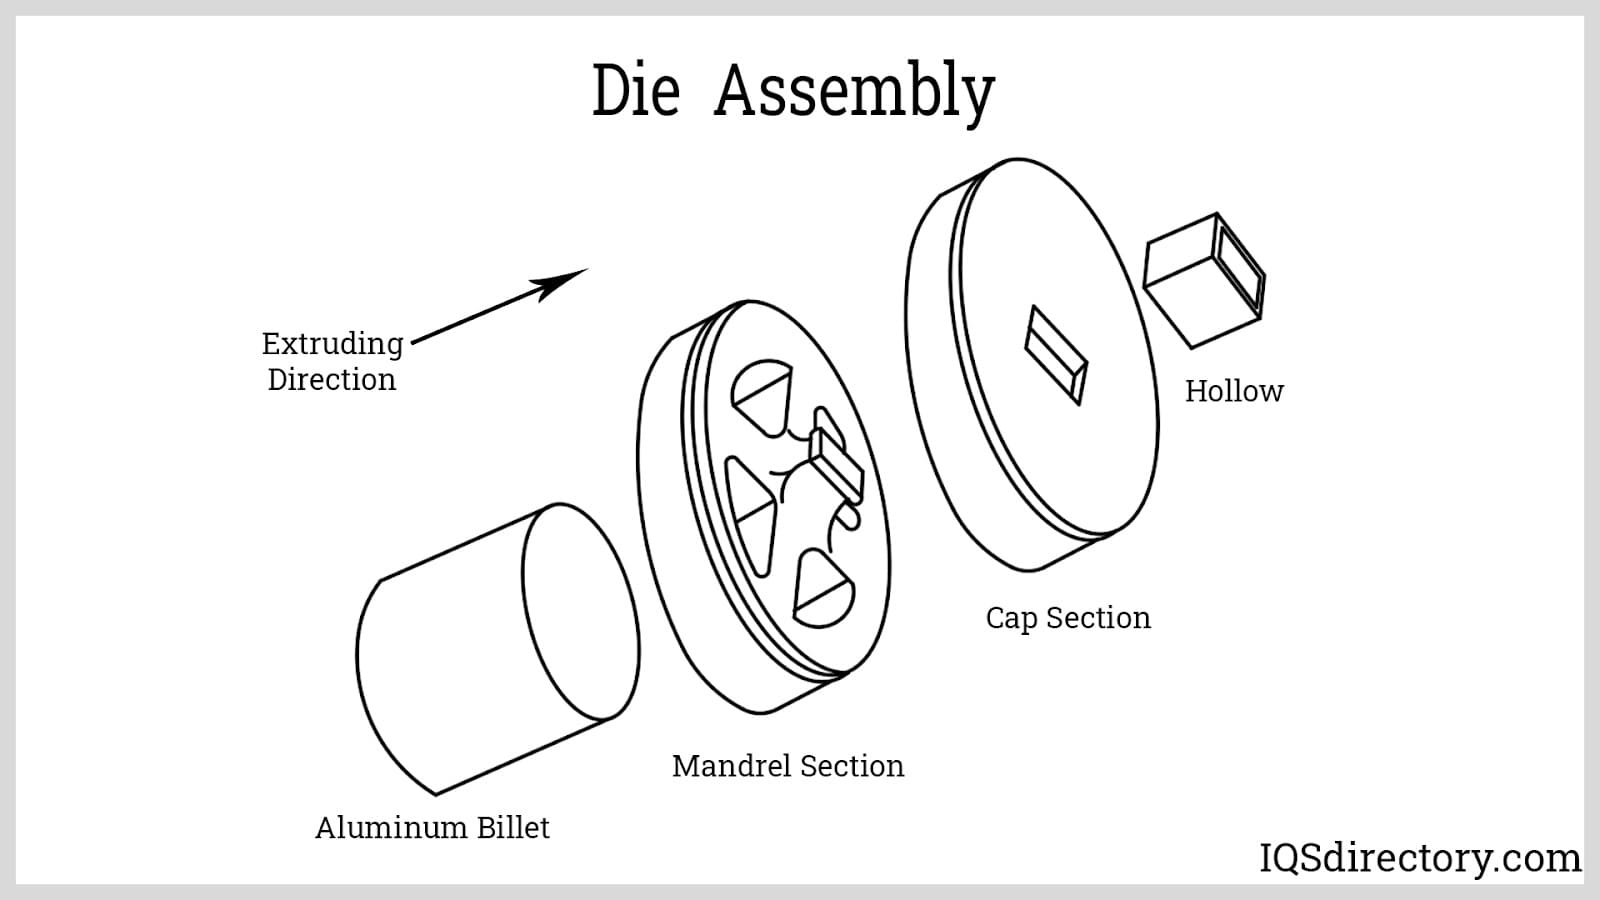 Die Assembly